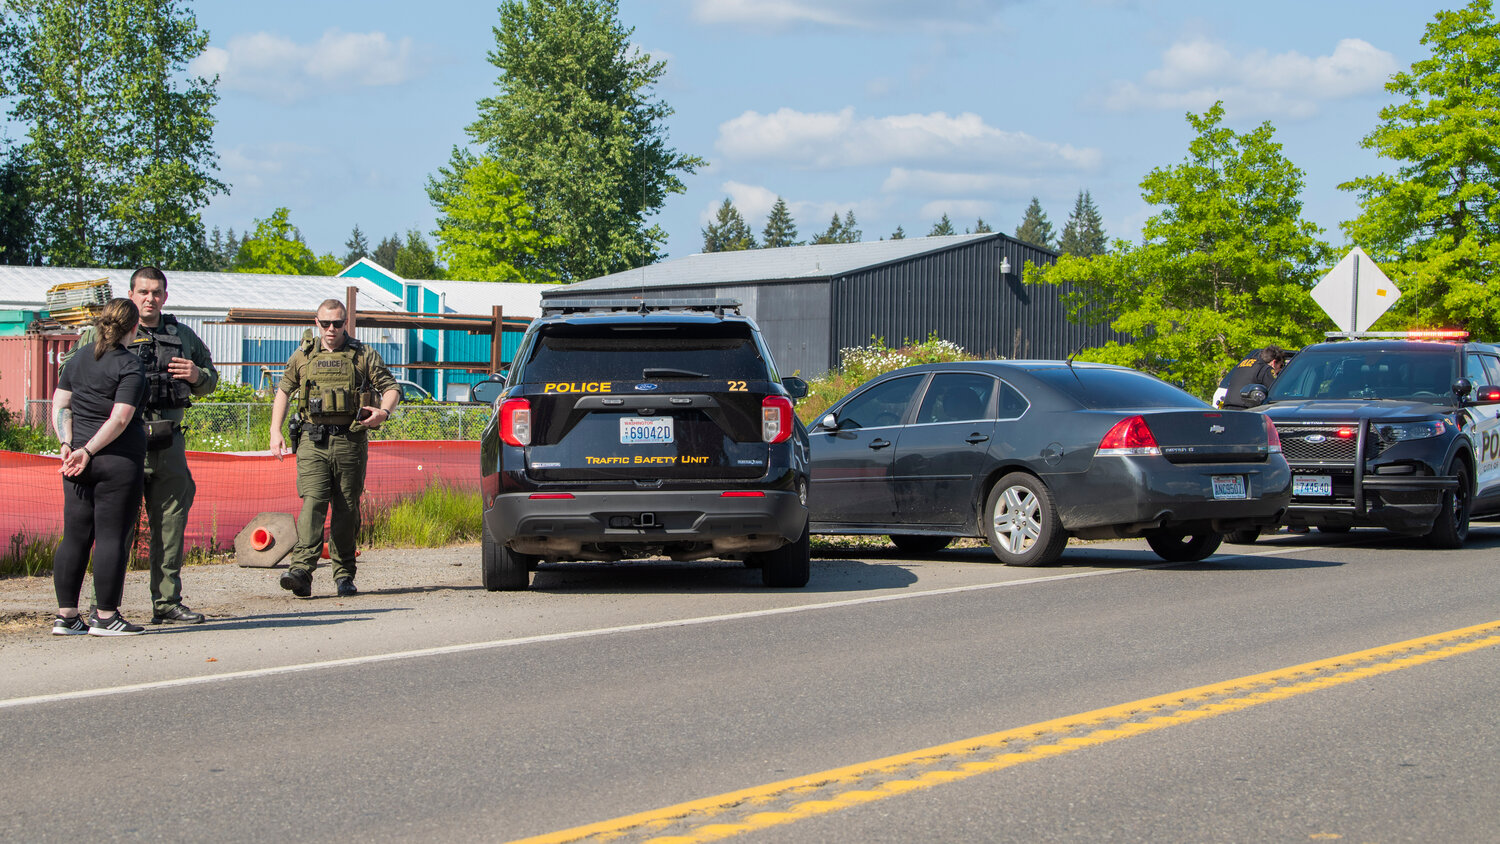 Two individuals were put into custody after a Flock camera identified a vehicle as stolen in downtown Centralia on Wednesday, May 24.